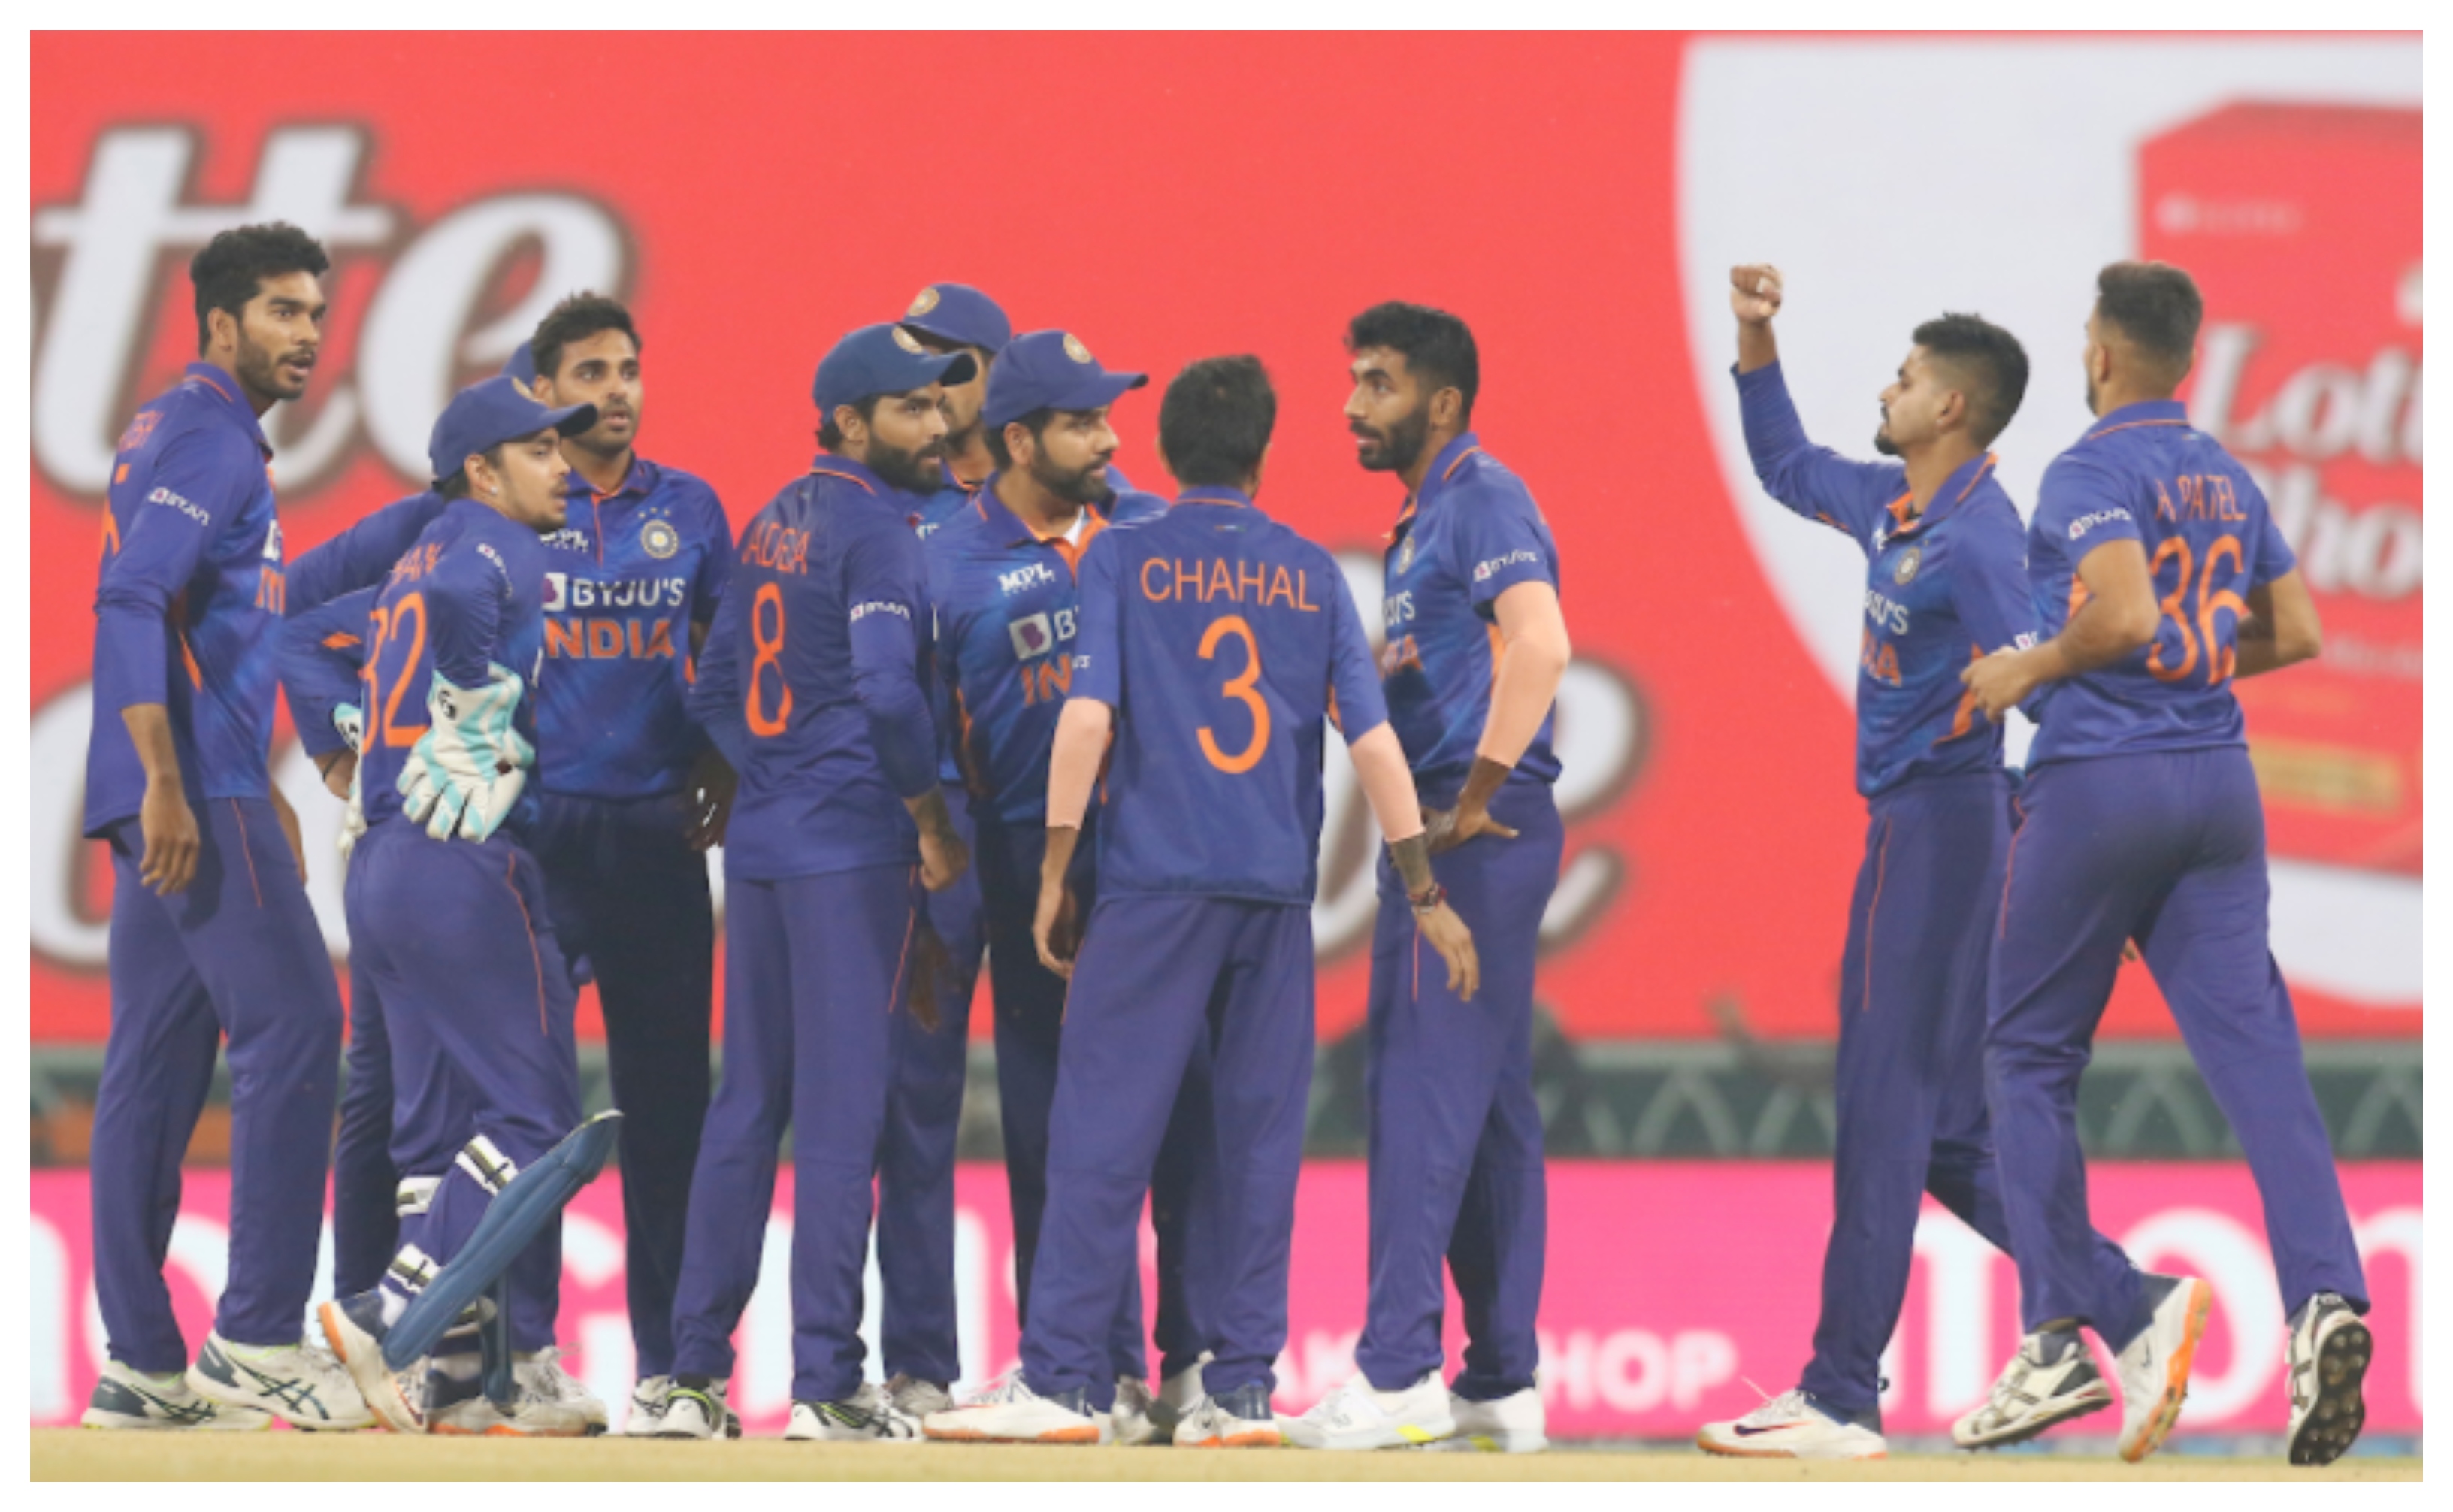 Team India outplayed Sri Lanka in T20I series opener | BCCI